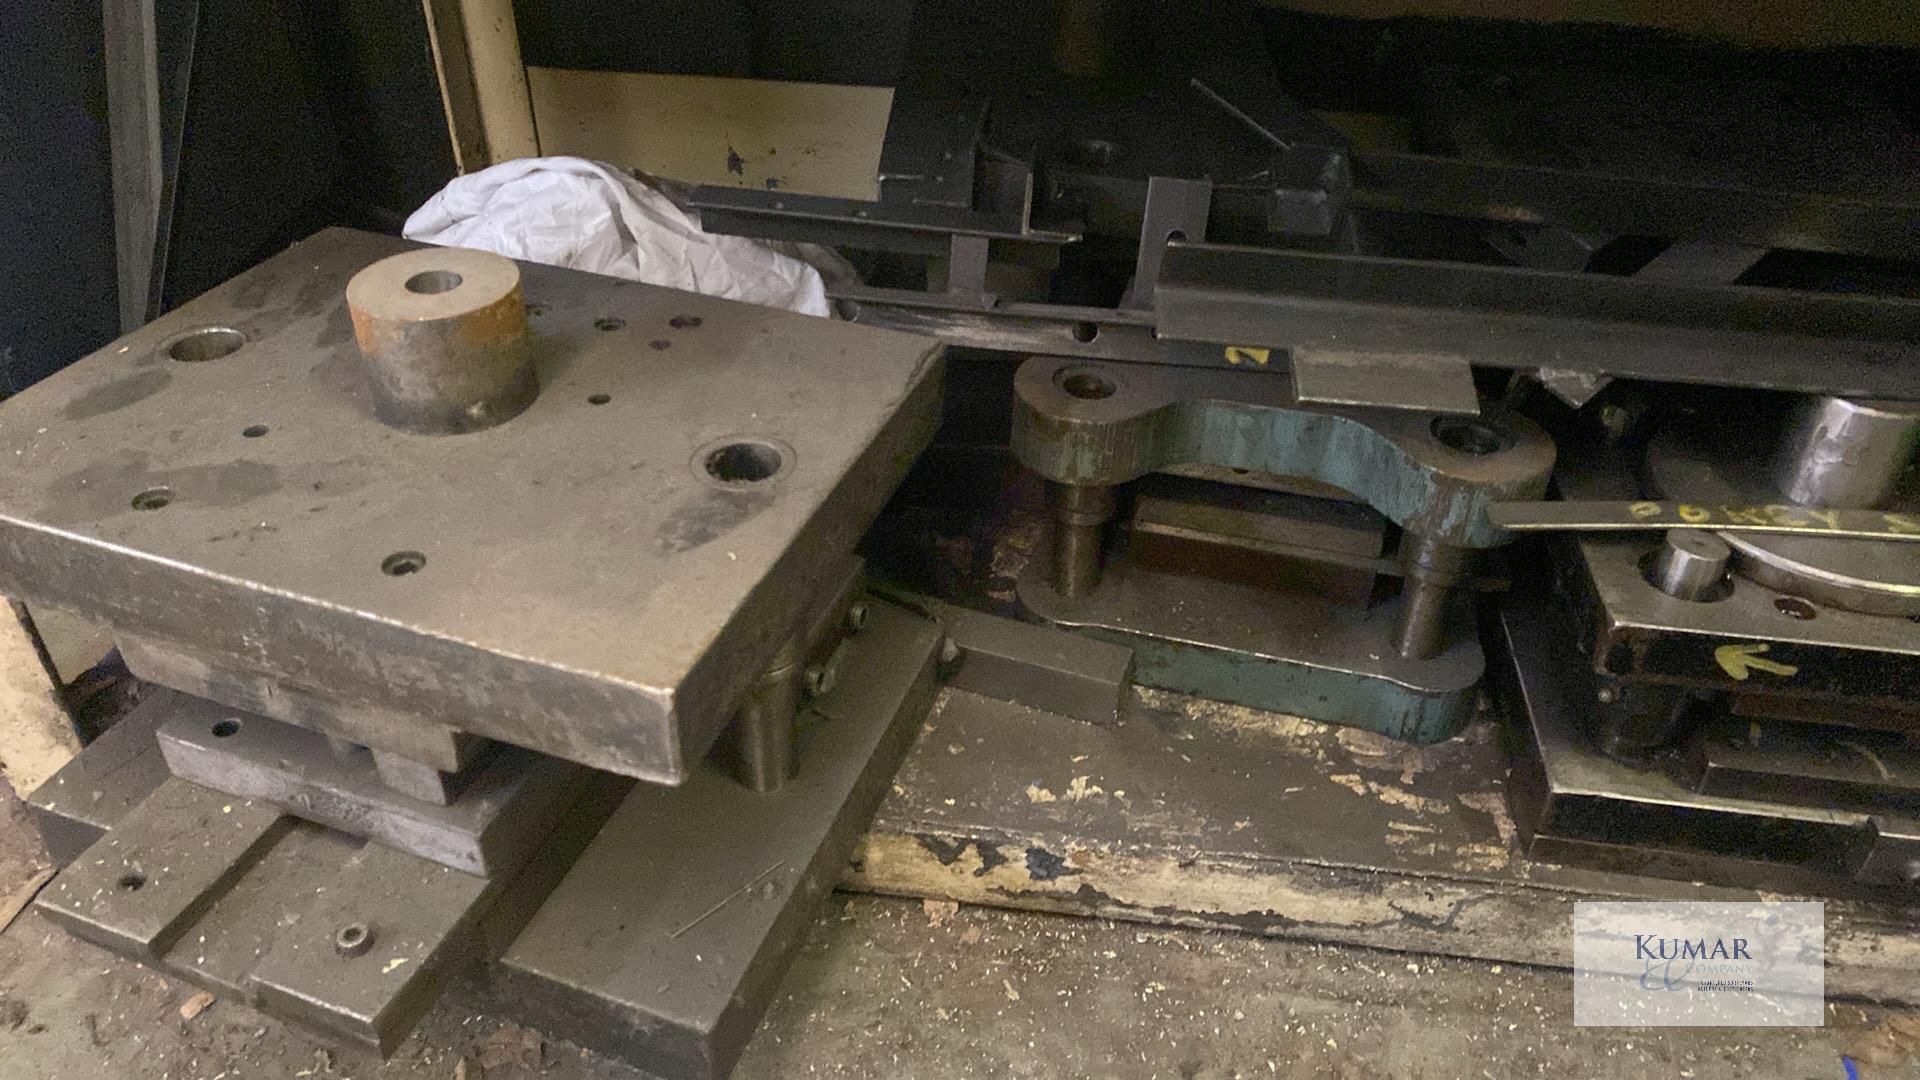 Machine Tooling as shown in pictures  Collection Day – Tuesday 27th February Unit 4 Goscote - Image 16 of 19